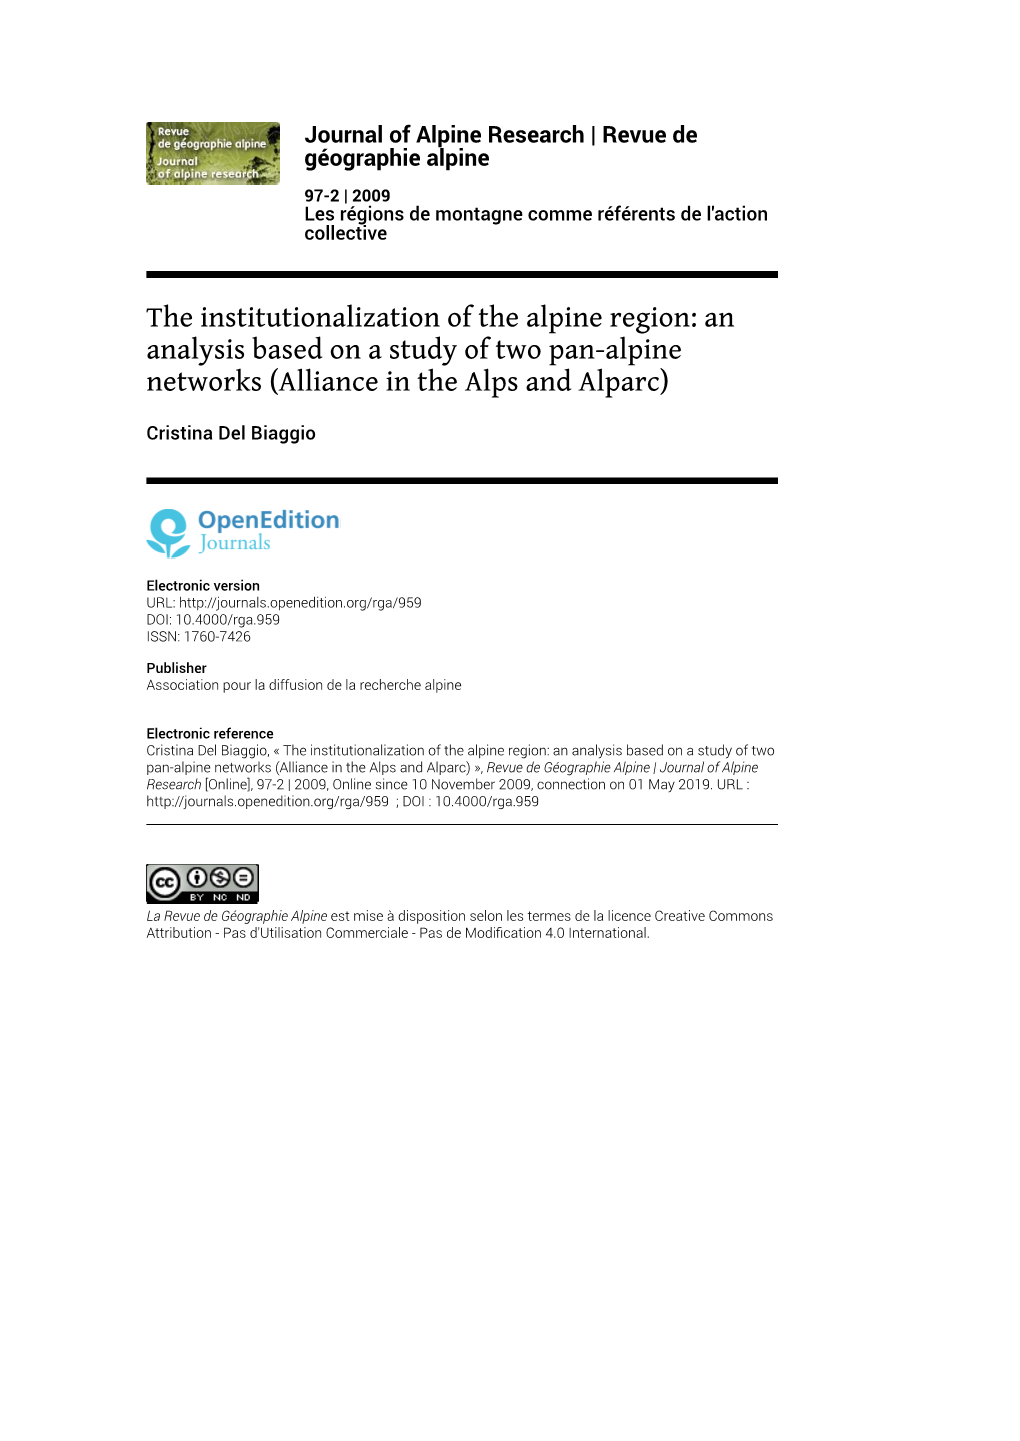 The Institutionalization of the Alpine Region: an Analysis Based on a Study of Two Pan-Alpine Networks (Alliance in the Alps and Alparc)